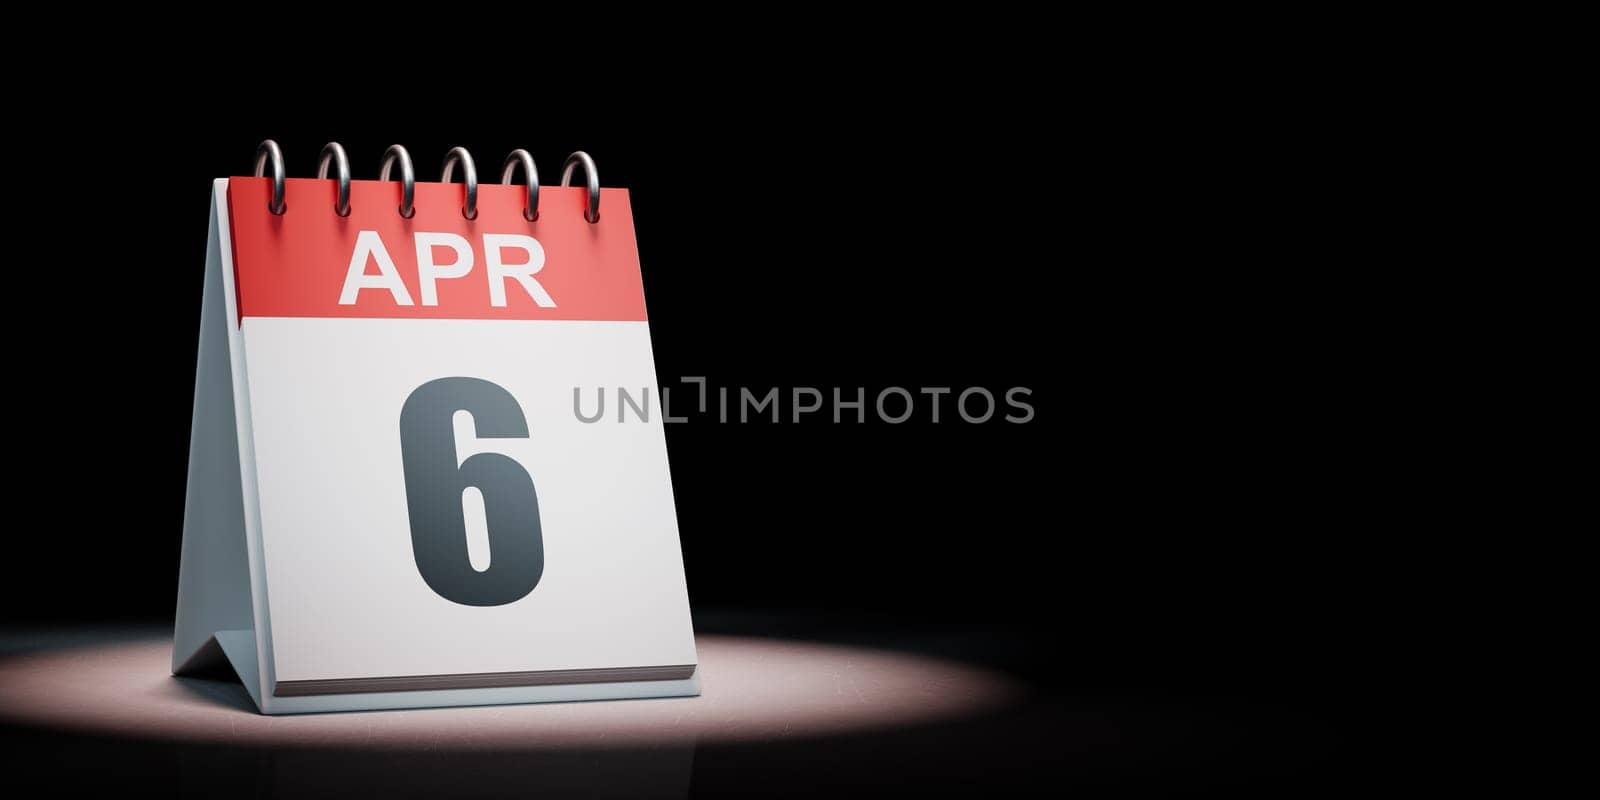 Red and White April 6 Desk Calendar Spotlighted on Black Background with Copy Space 3D Illustration